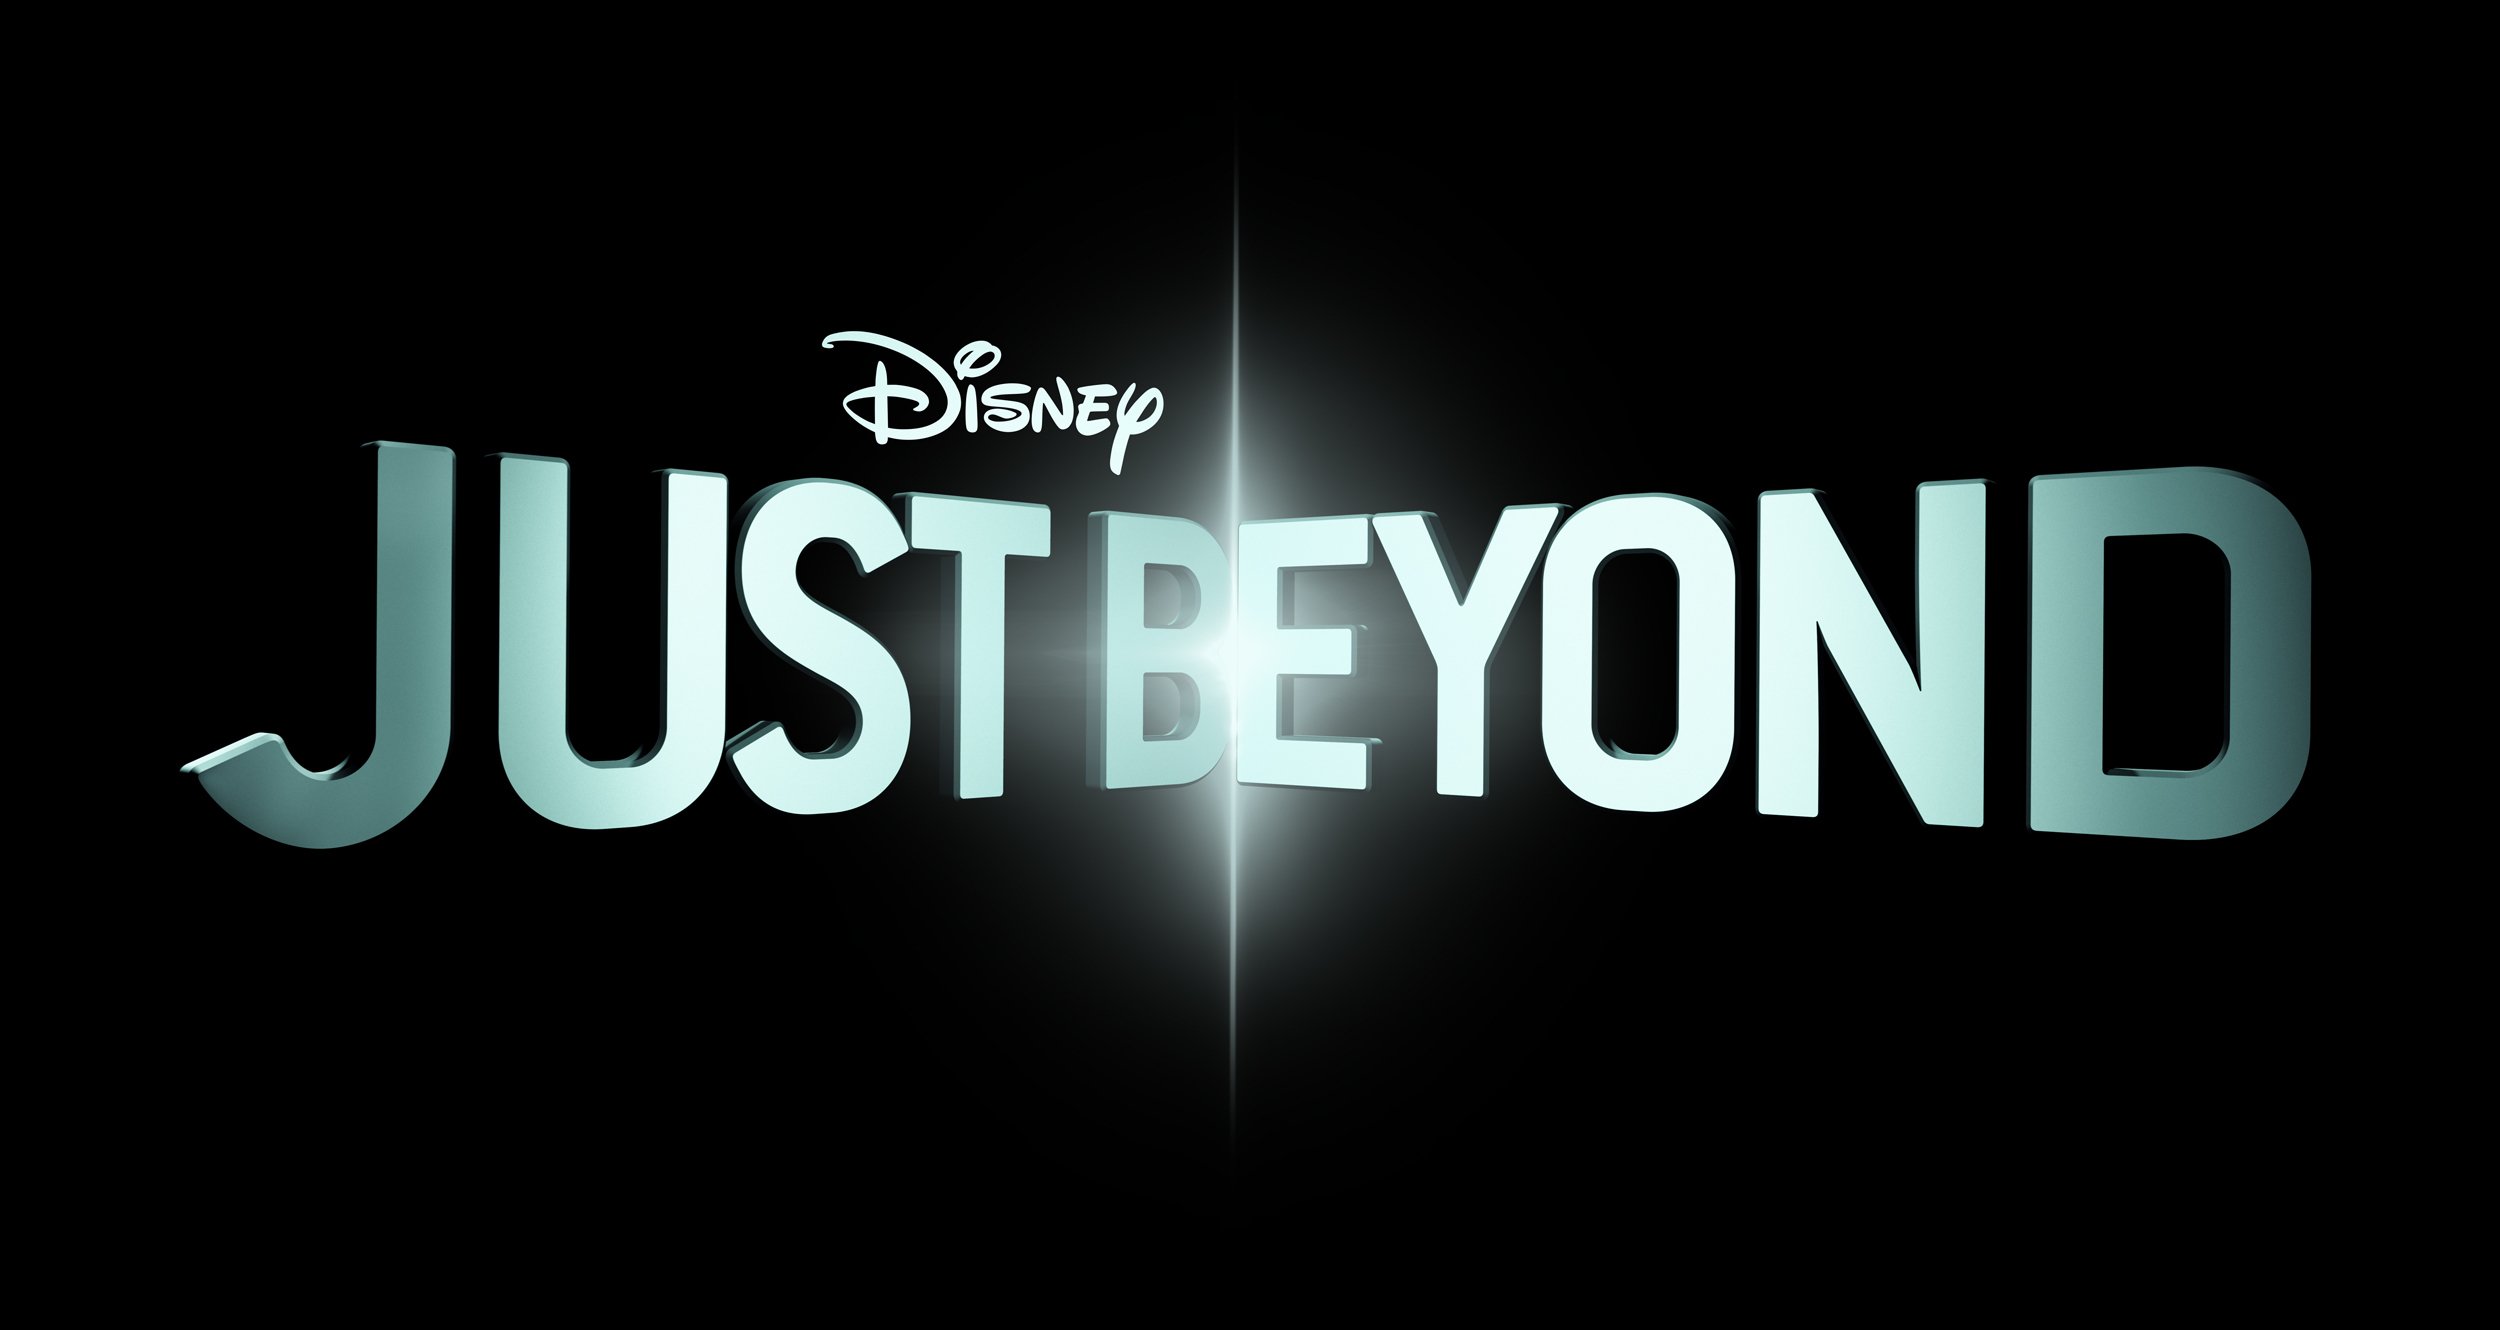 The logo for the upcoming Disney+ series based on R.L. Stine's graphic novels, 'Just Beyond'